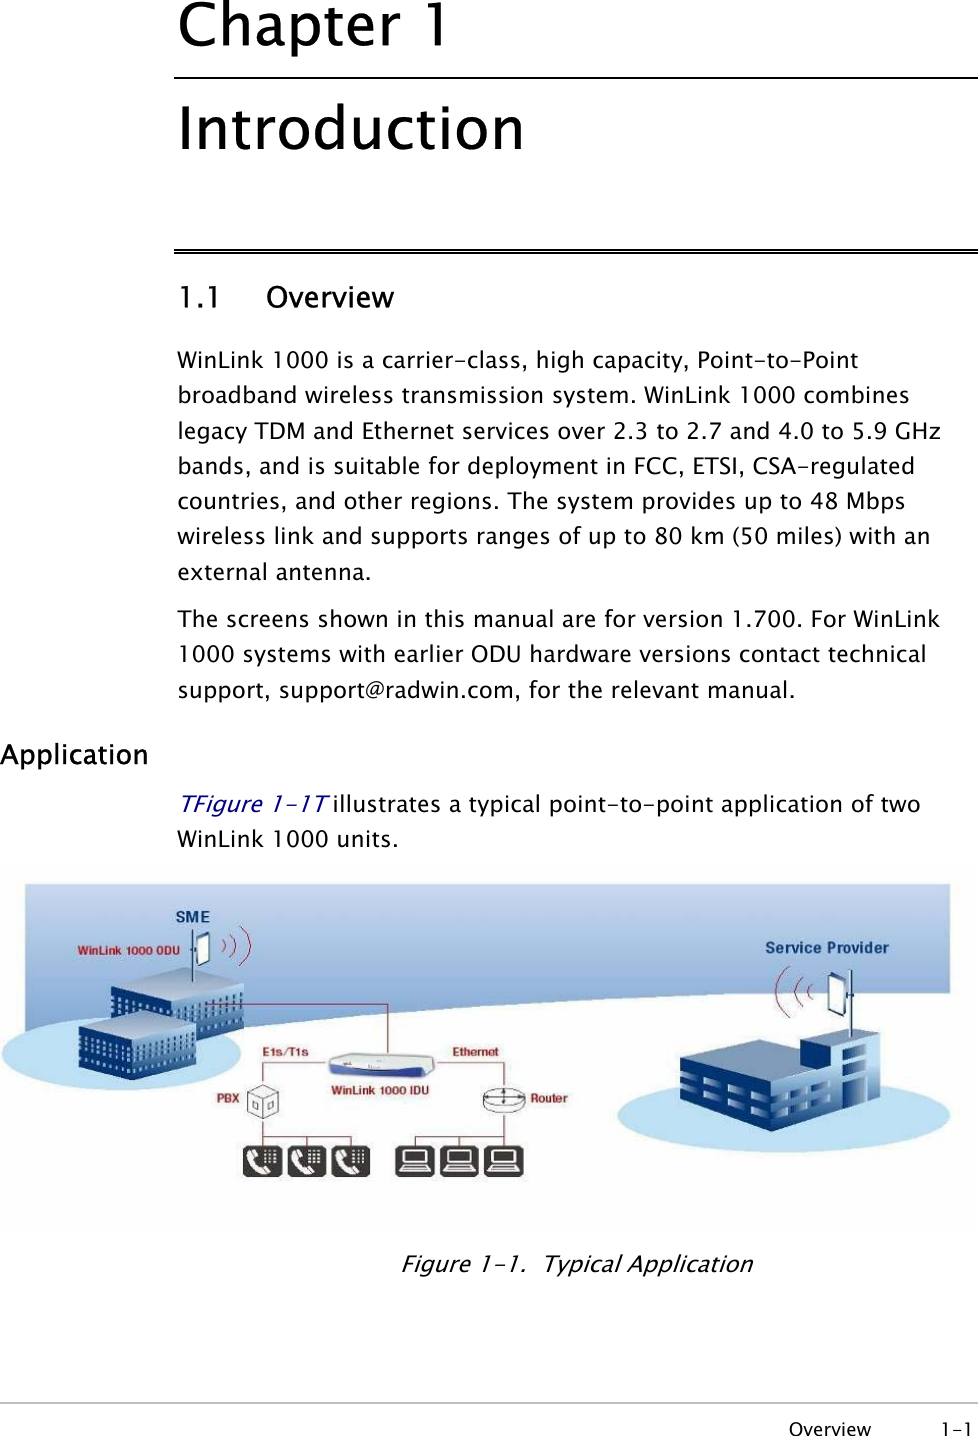 Chapter  1 Introduction 1.1   Overview WinLink 1000 is a carrier-class, high capacity, Point-to-Point broadband wireless transmission system. WinLink 1000 combines legacy TDM and Ethernet services over 2.3 to 2.7 and 4.0 to 5.9 GHz bands, and is suitable for deployment in FCC, ETSI, CSA-regulated countries, and other regions. The system provides up to 48 Mbps wireless link and supports ranges of up to 80 km (50 miles) with an external antenna. The screens shown in this manual are for version 1.700. For WinLink 1000 systems with earlier ODU hardware versions contact technical support, support@radwin.com, for the relevant manual. Application TFigure  1-1T illustrates a typical point-to-point application of two WinLink 1000 units.   Figure  1-1.  Typical Application  Overview 1-1 